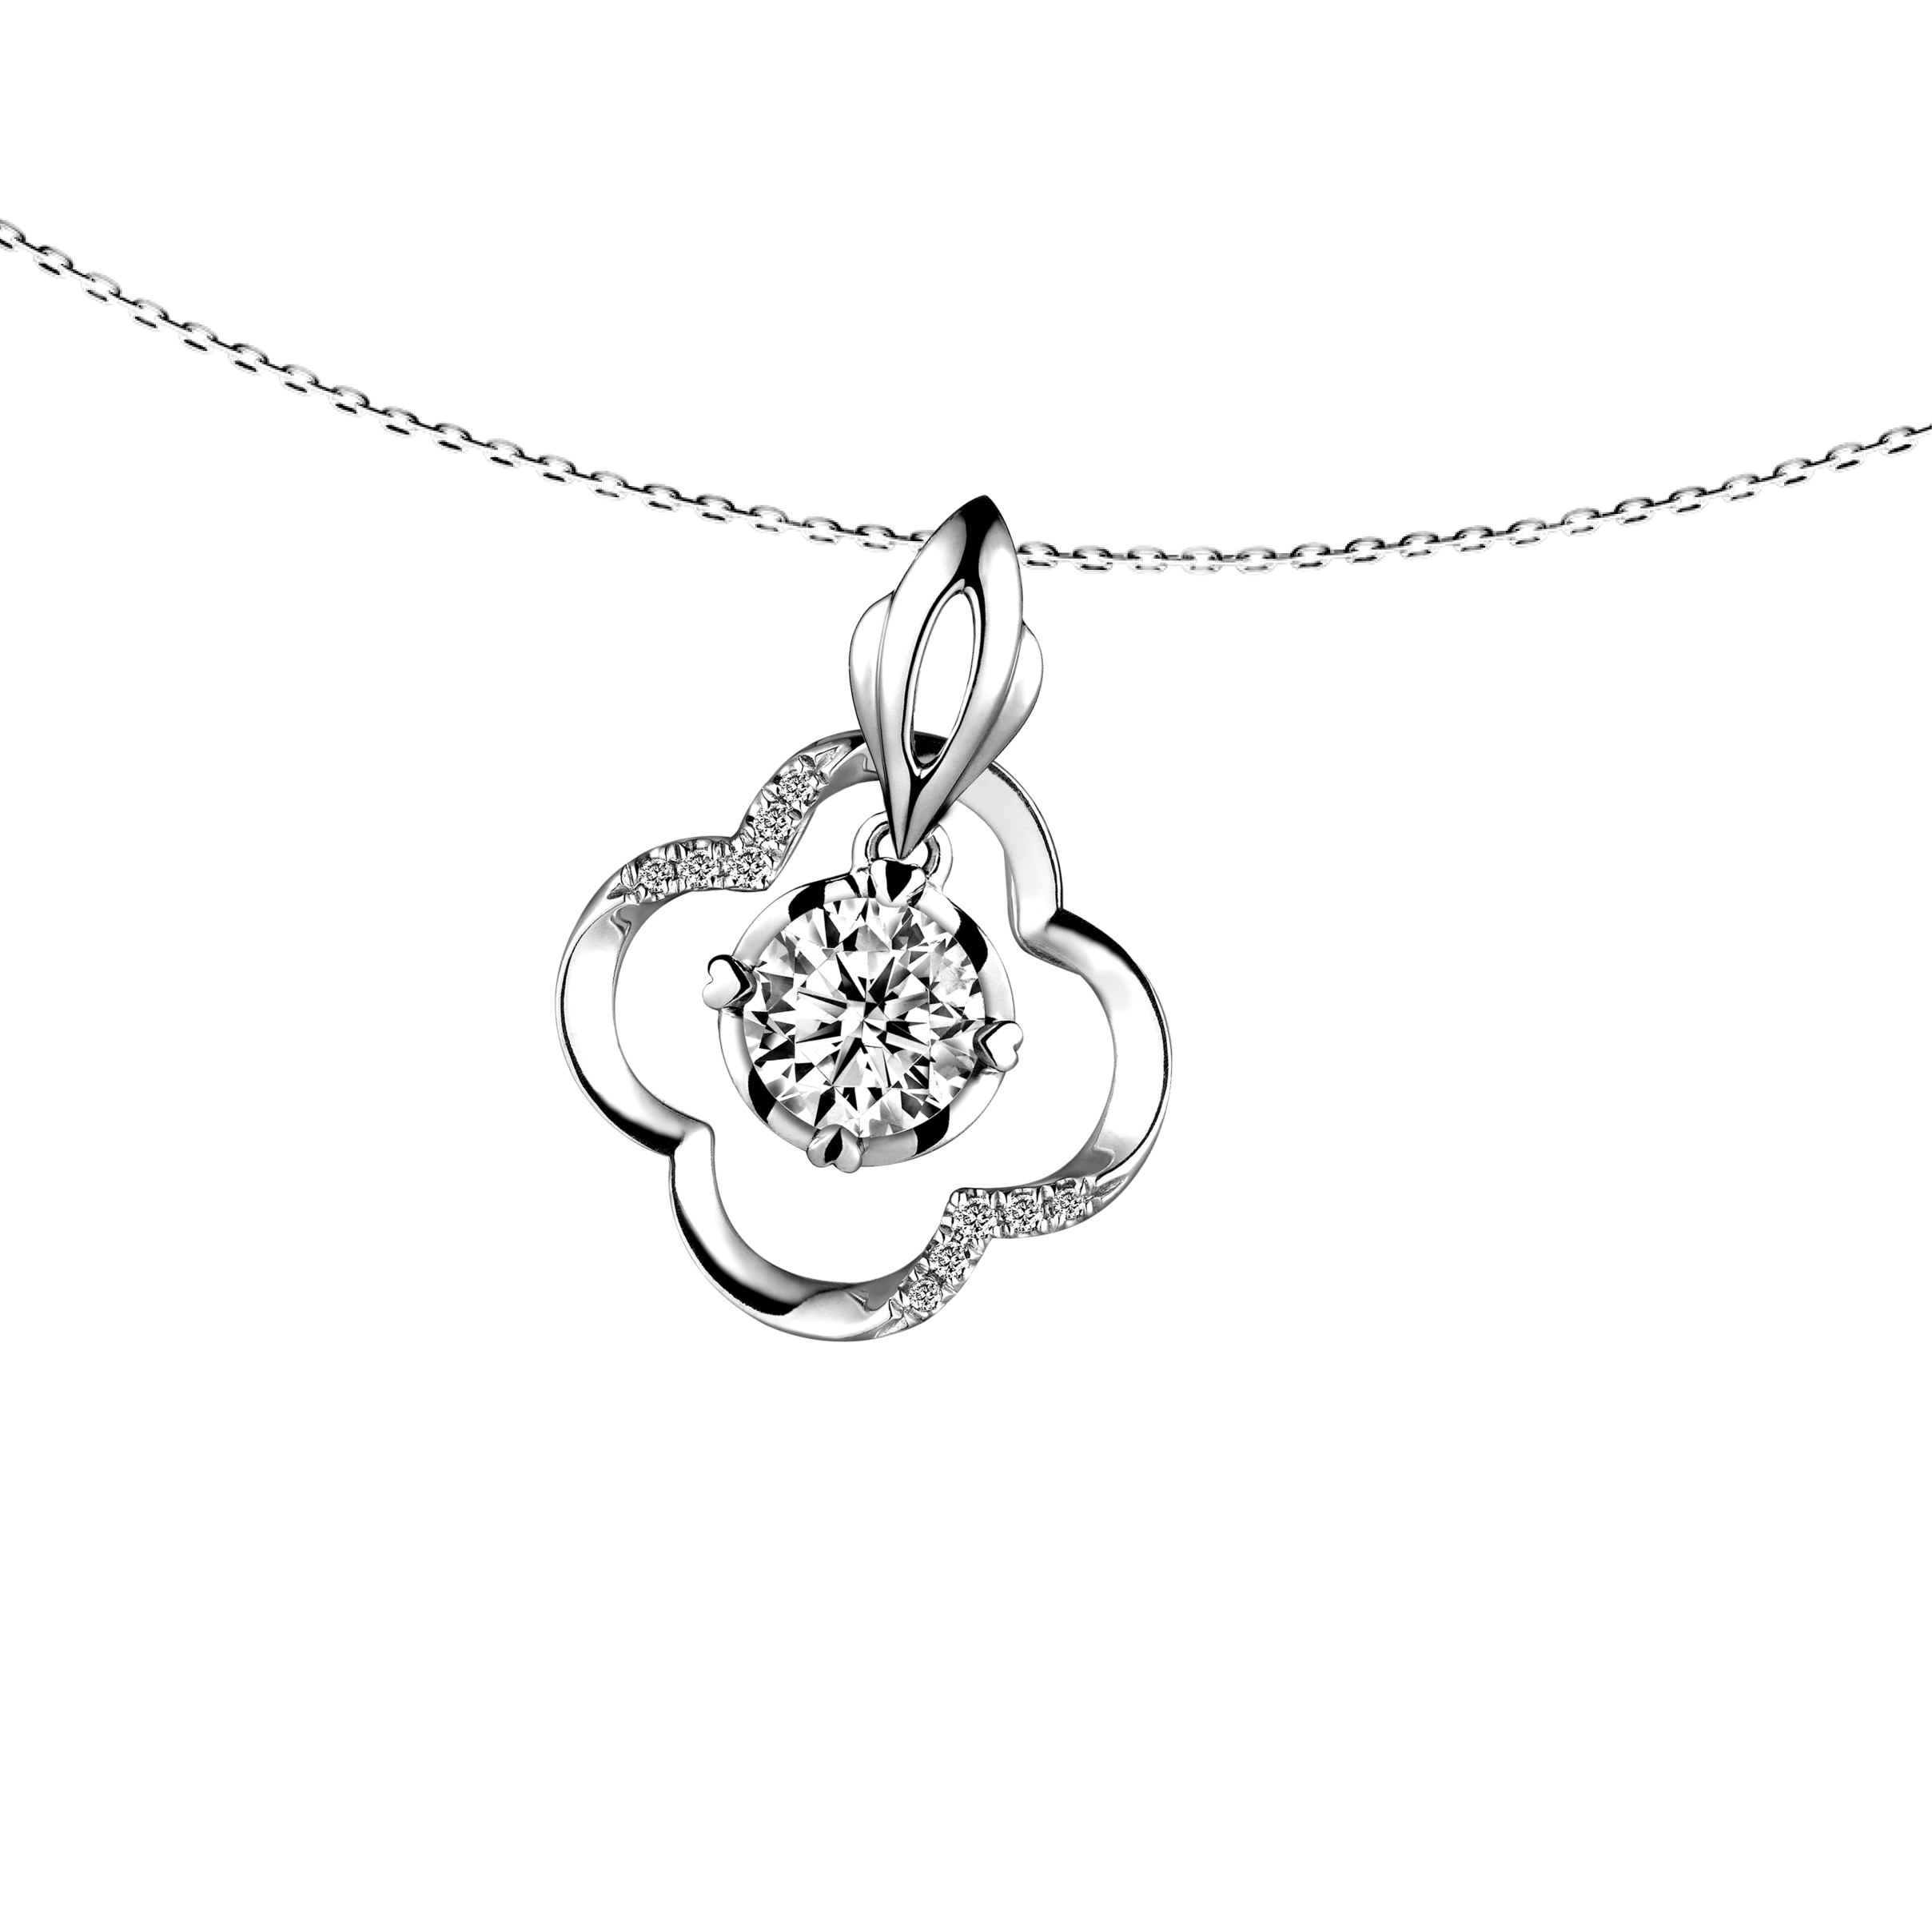 Love is Beauty Collection 18K White Gold Diamond Pendant